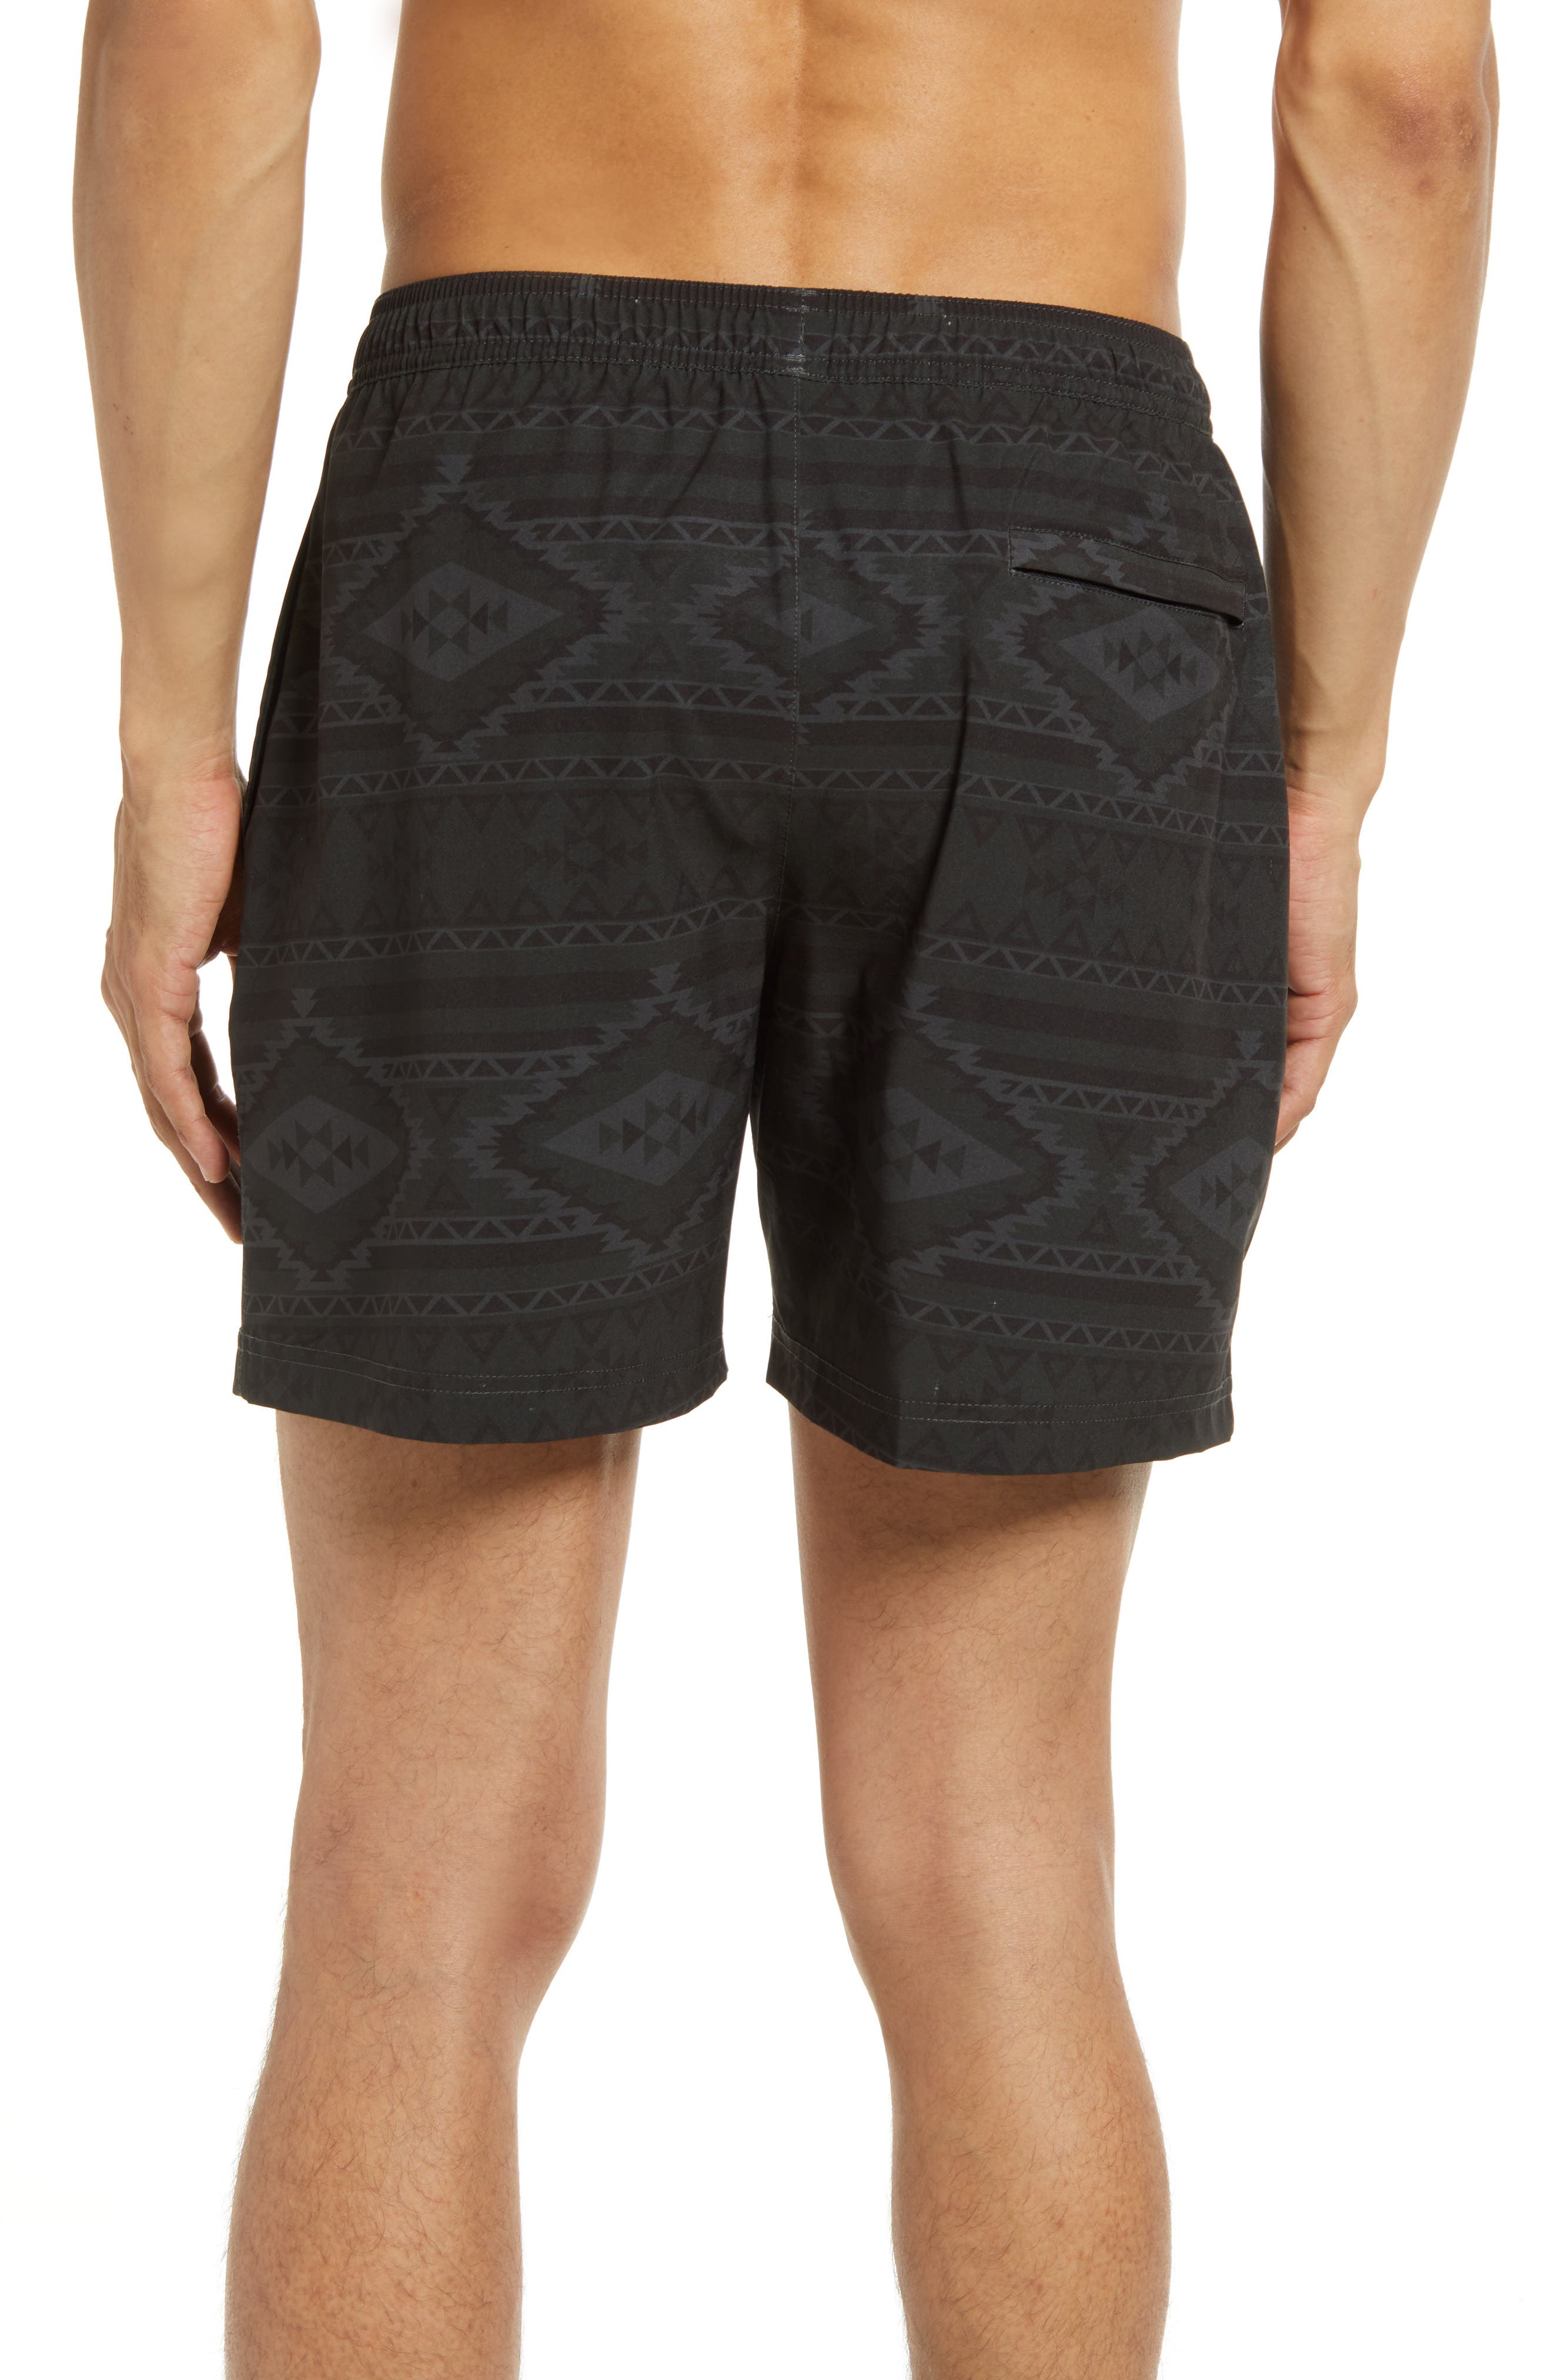 Chubbies Compression Lined Shorts The Quests 5.5" Inseam 